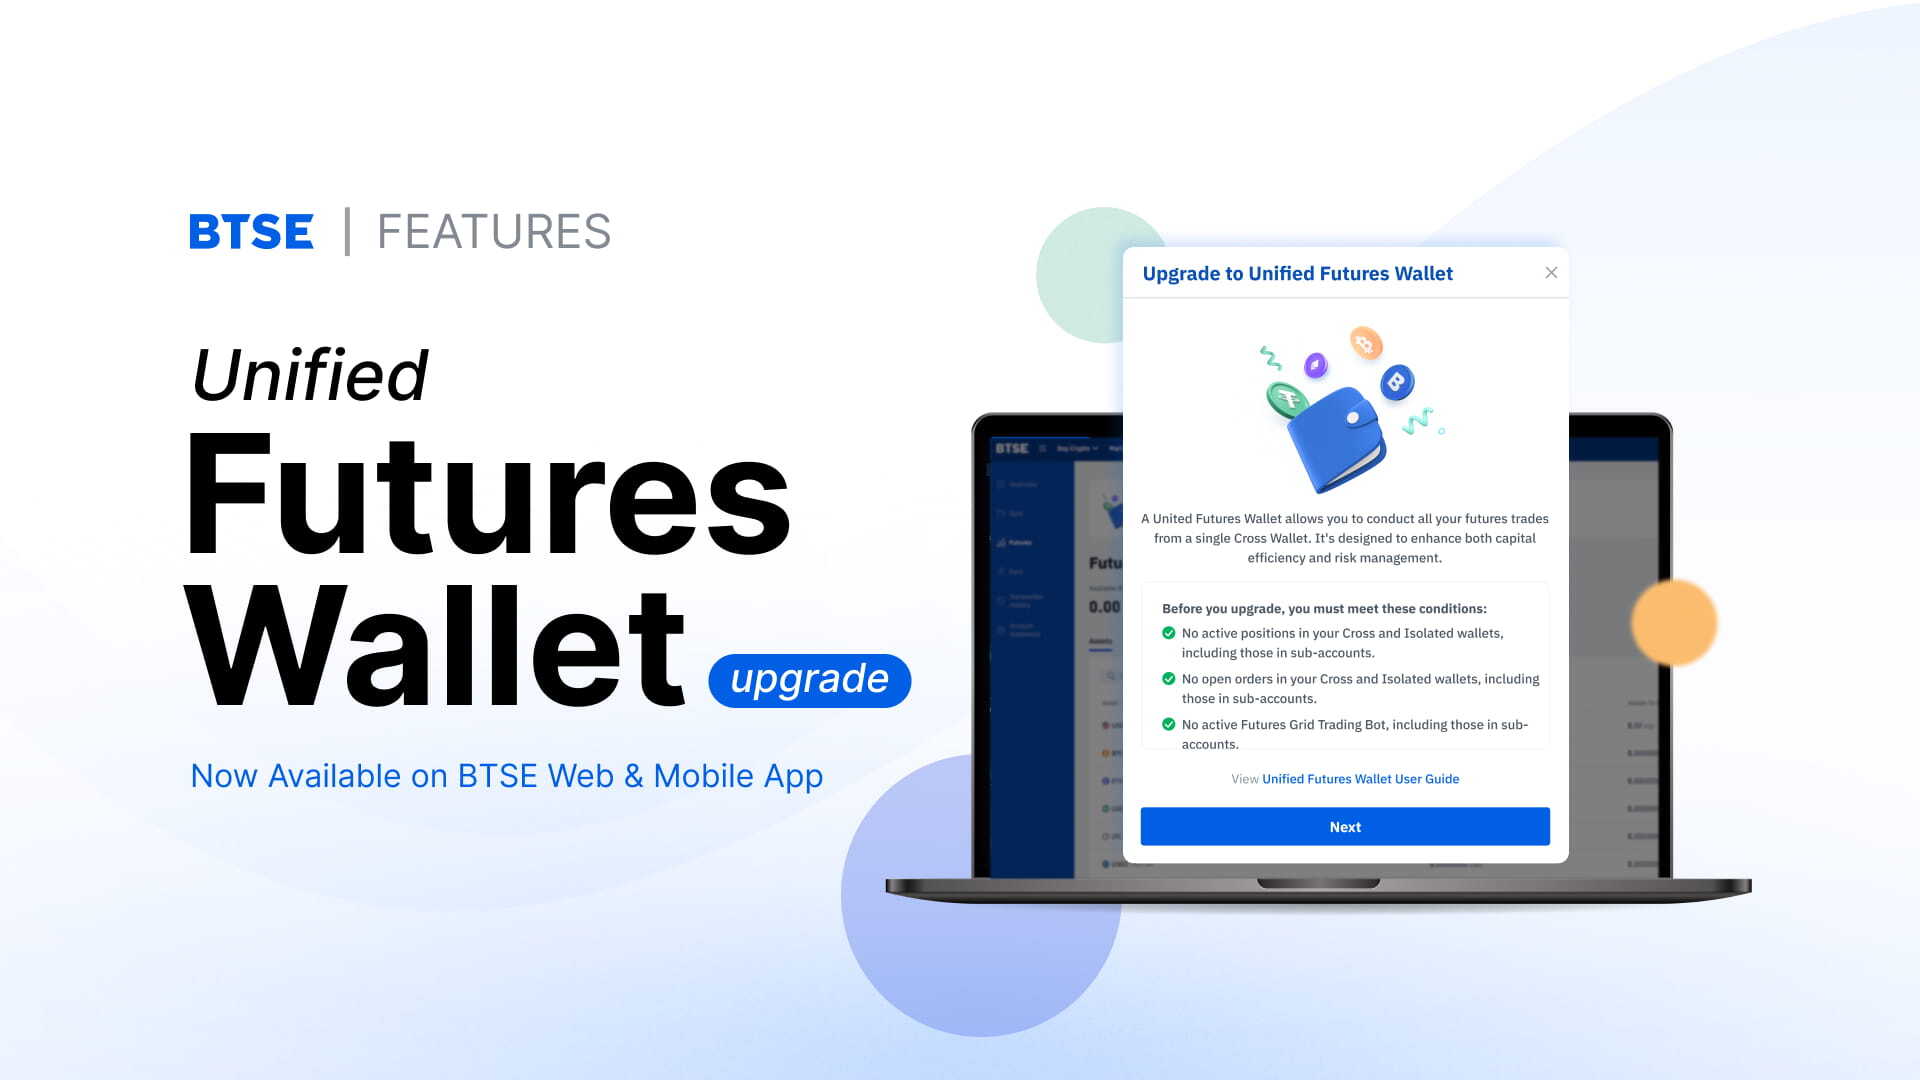 Unified futures wallet upgrade